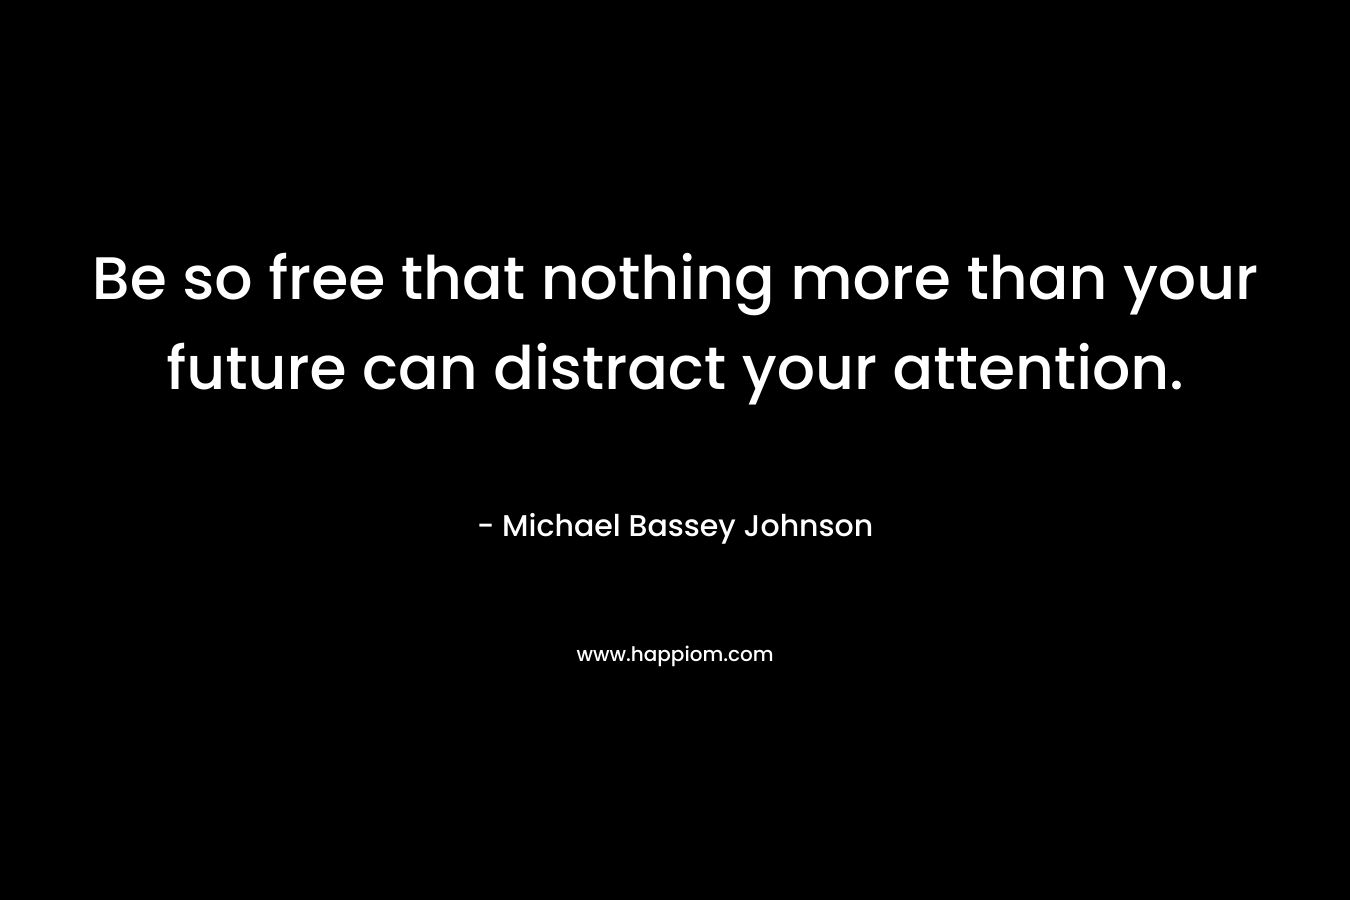 Be so free that nothing more than your future can distract your attention.